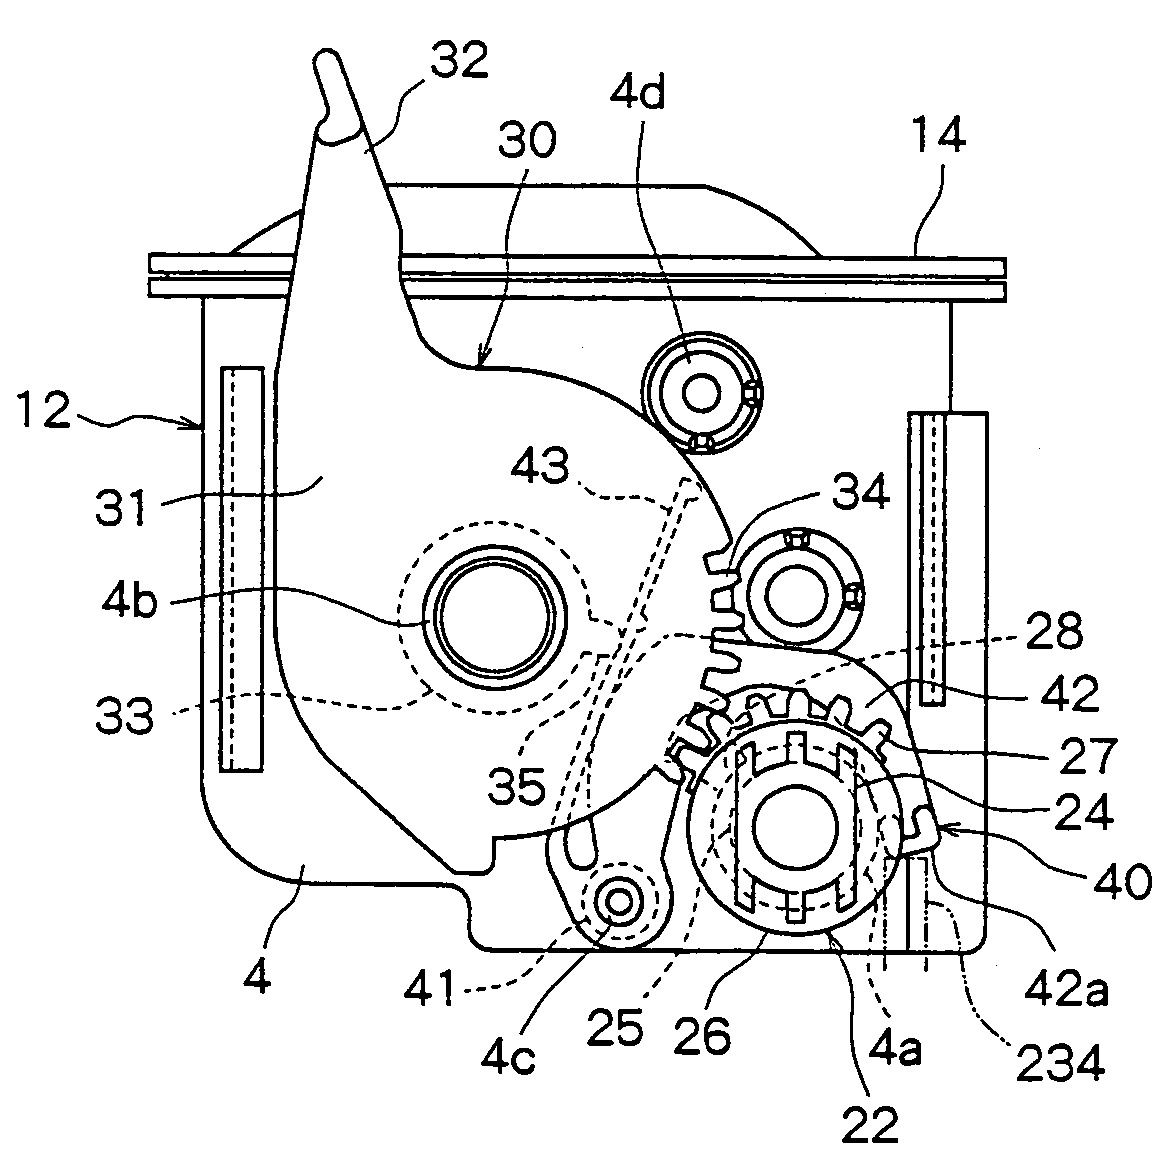 Structure for locking a shutter member in a toner supplying container